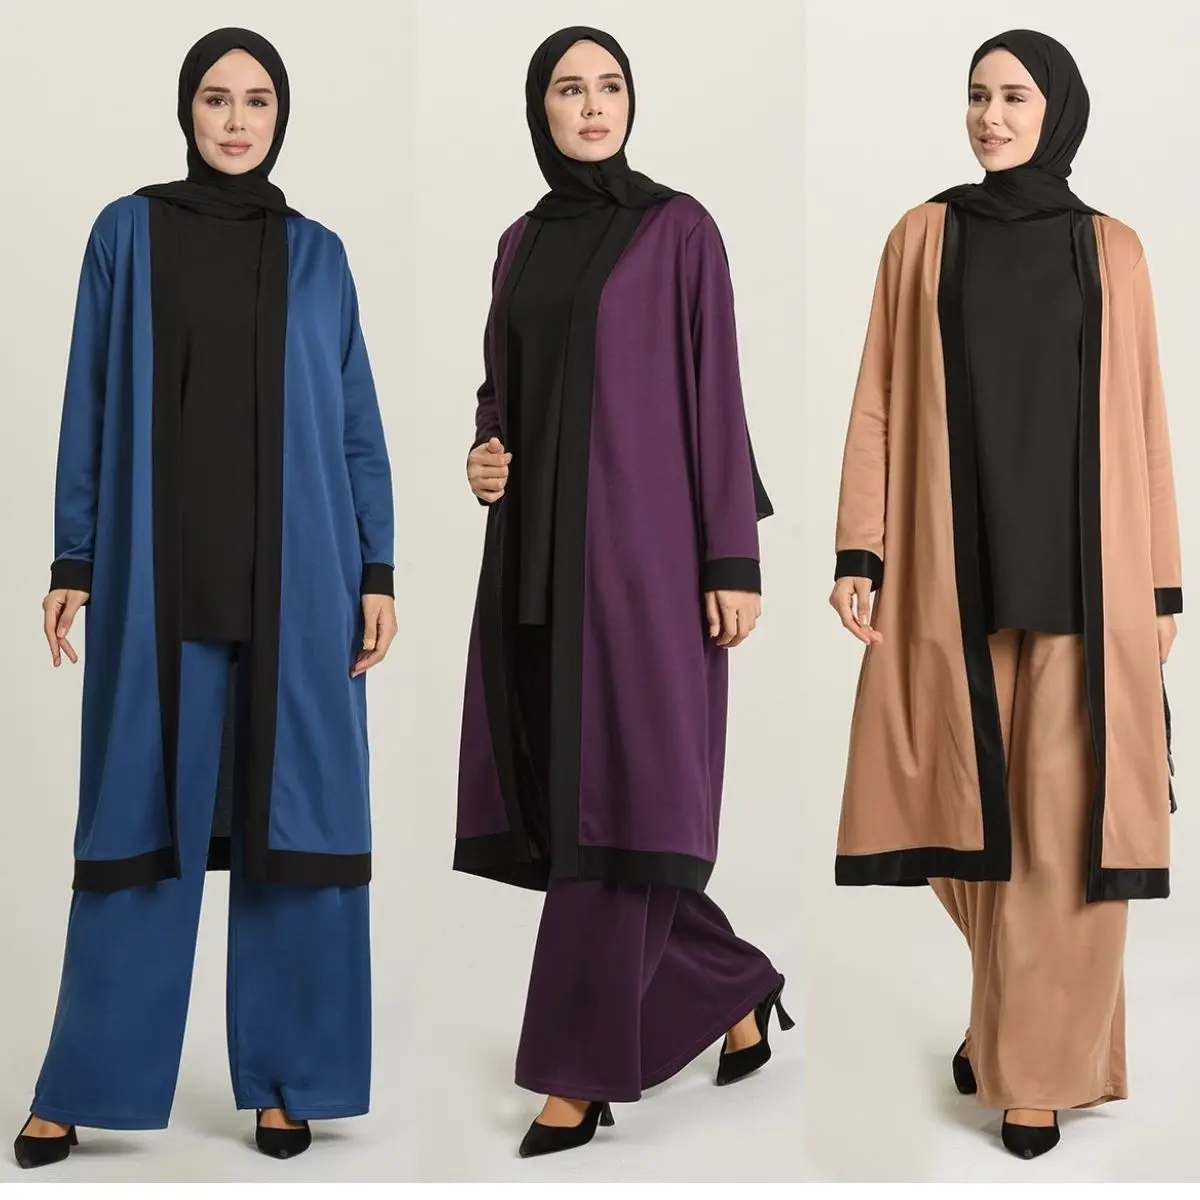 Muslim Fashion Casual 3 Pieces Sets Women Tracksuit Patterned Long + Pants Jogging + Solid Top Over Suits Islam Hijab